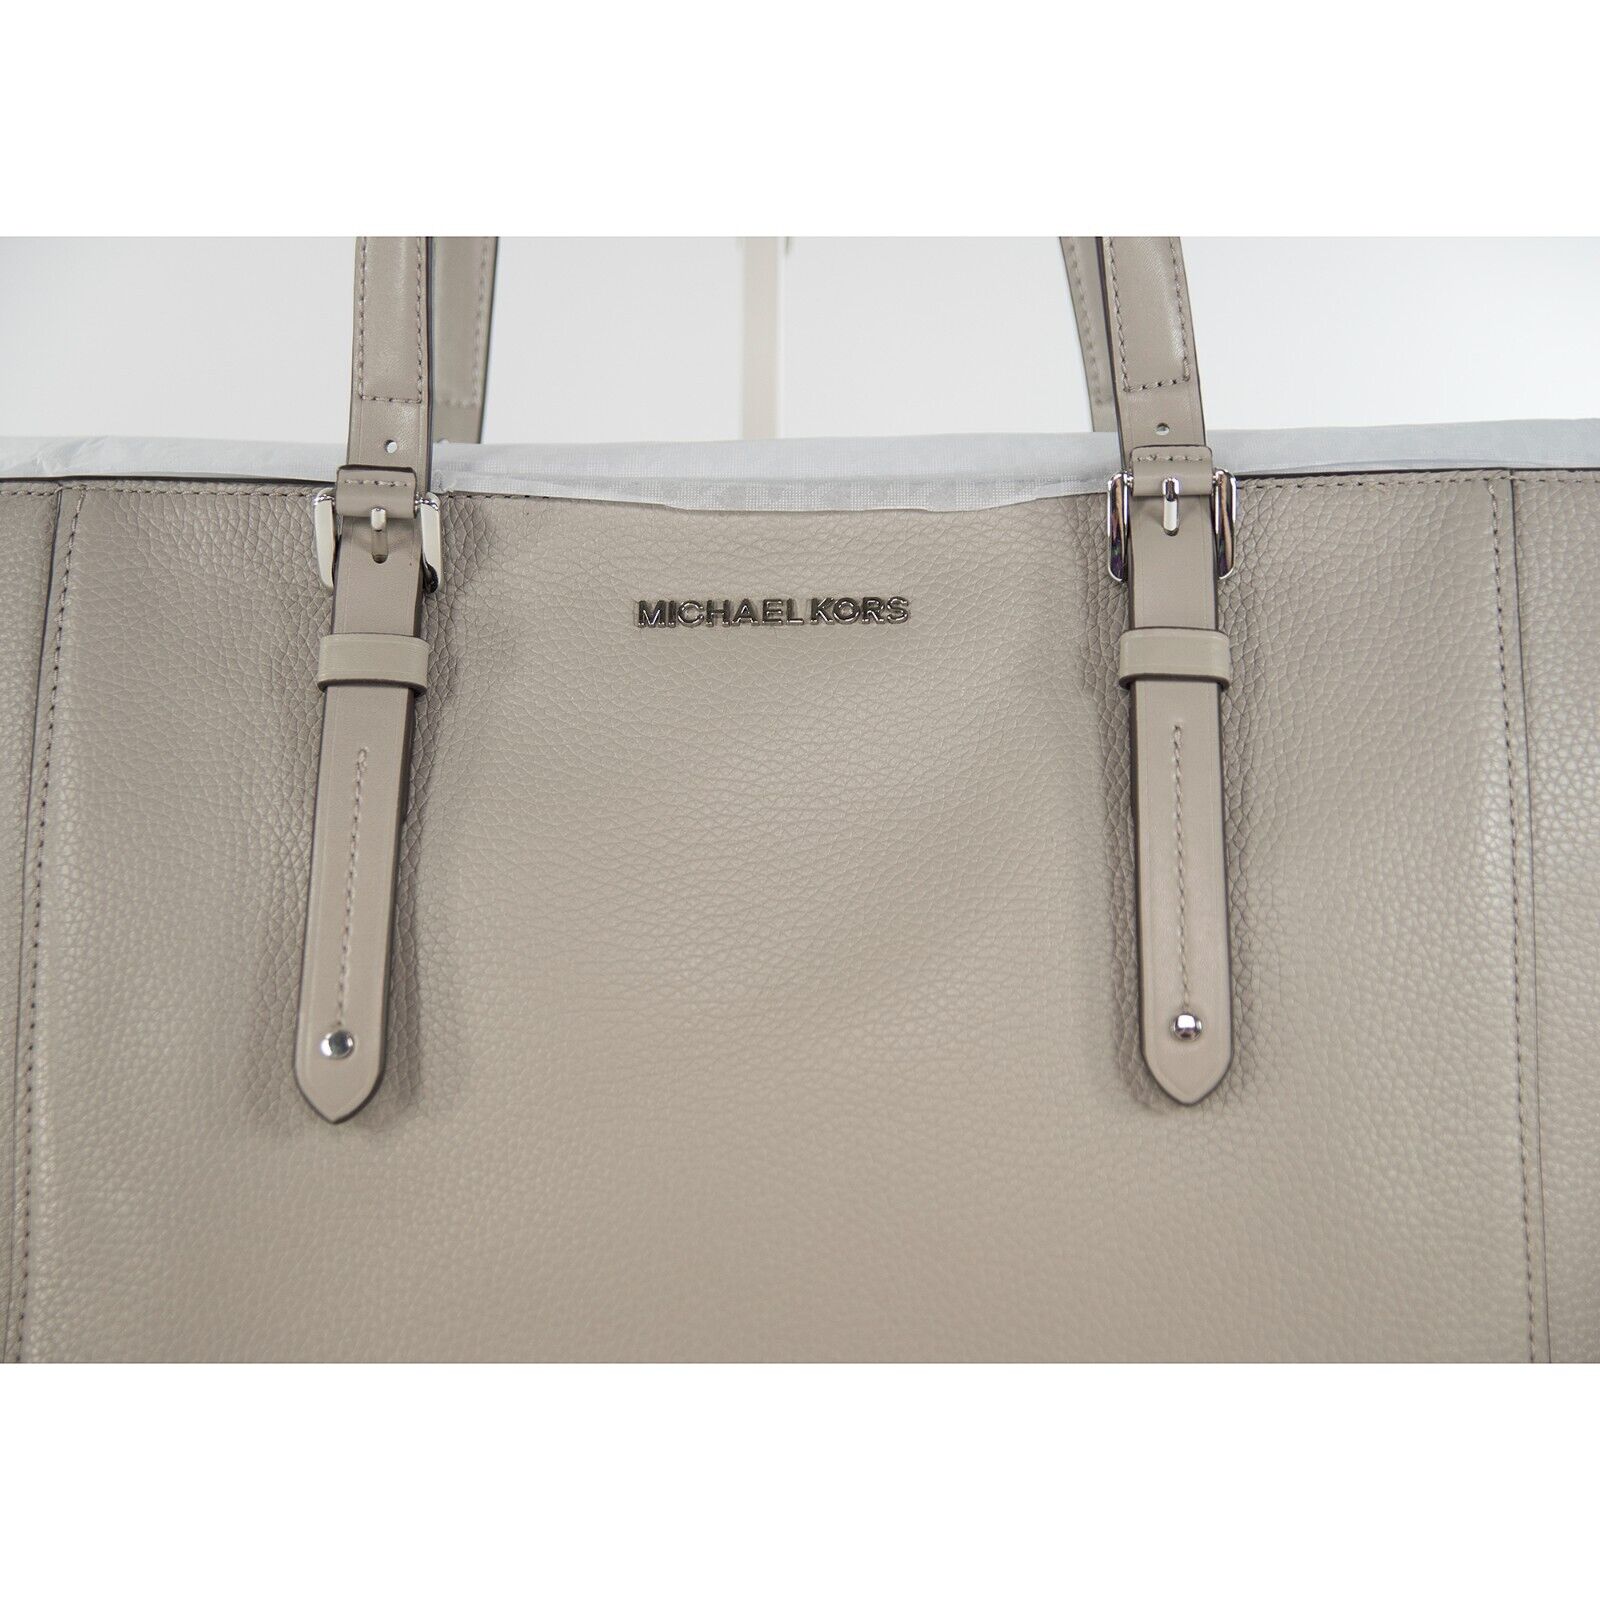 Michael Kors Pale Blue Saffiano Leather Multifunction Travel Tote Bag NWT